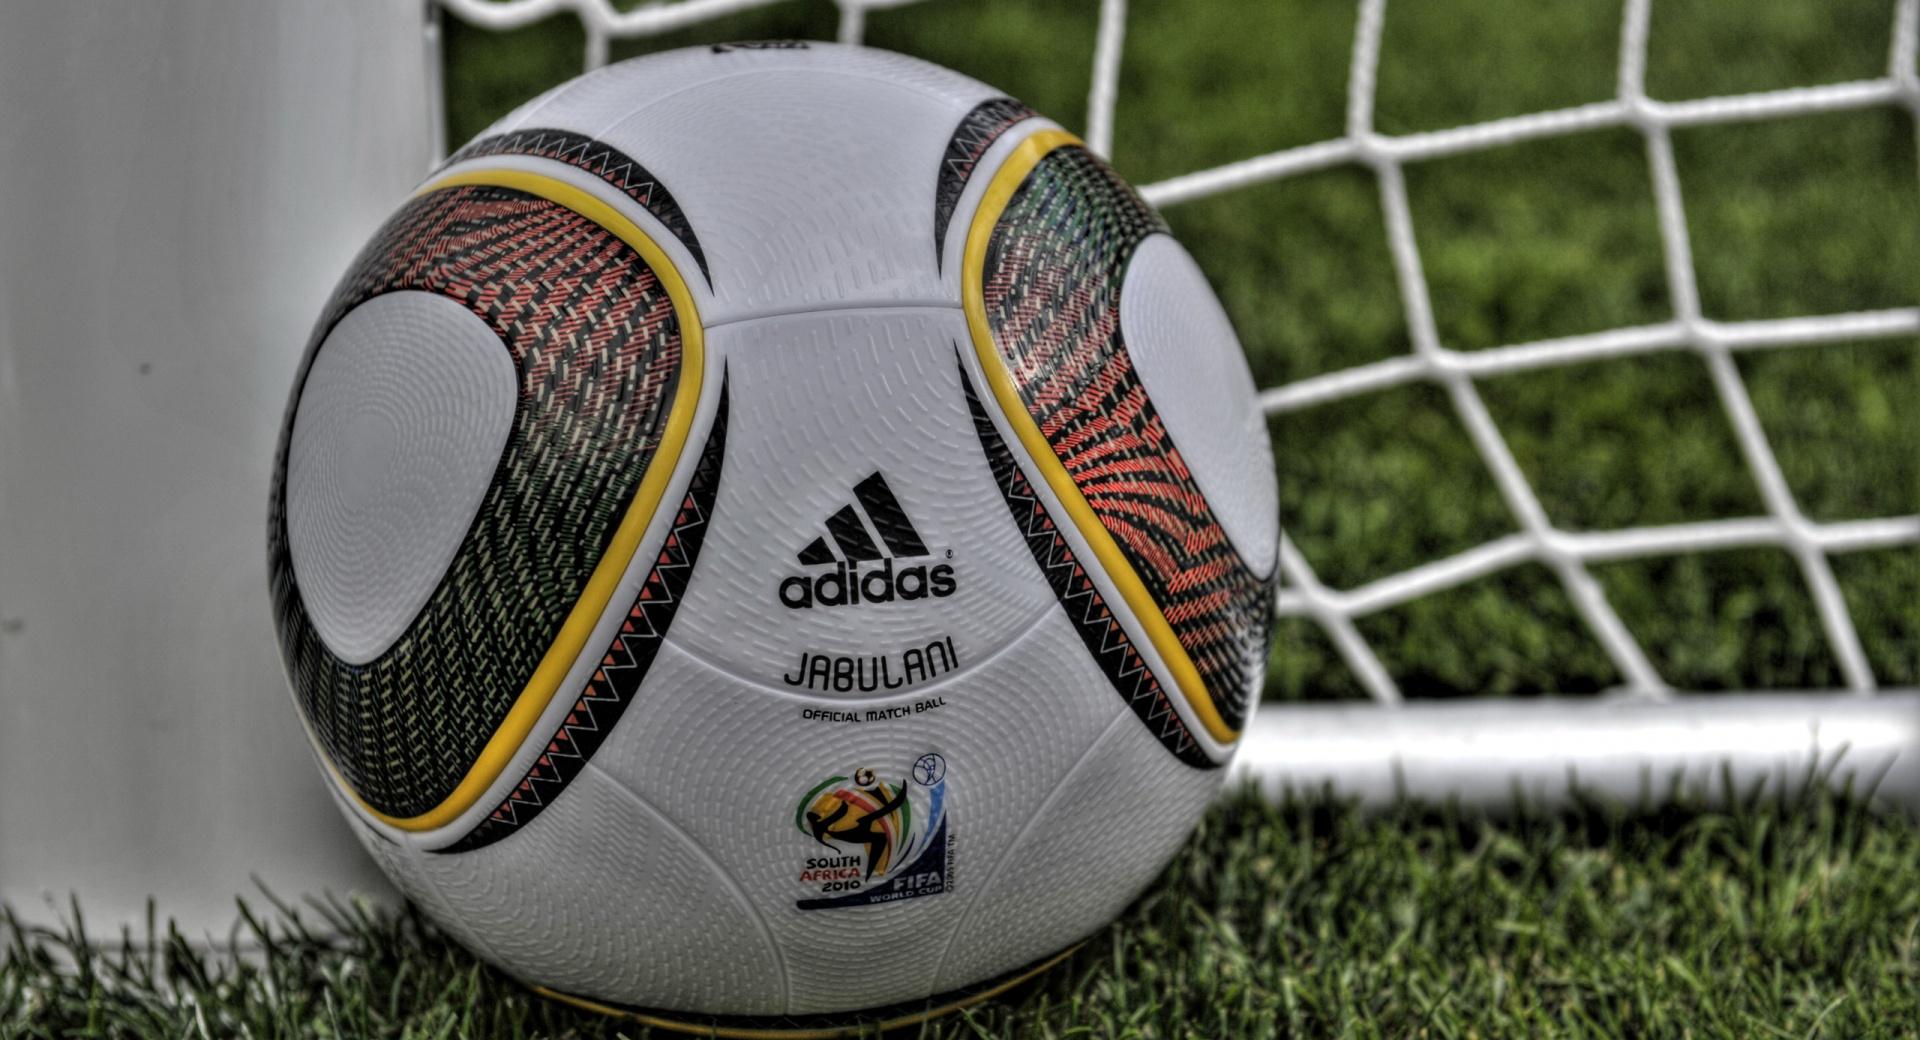 Fifa World Cup South Africa 2010 Ball wallpapers HD quality